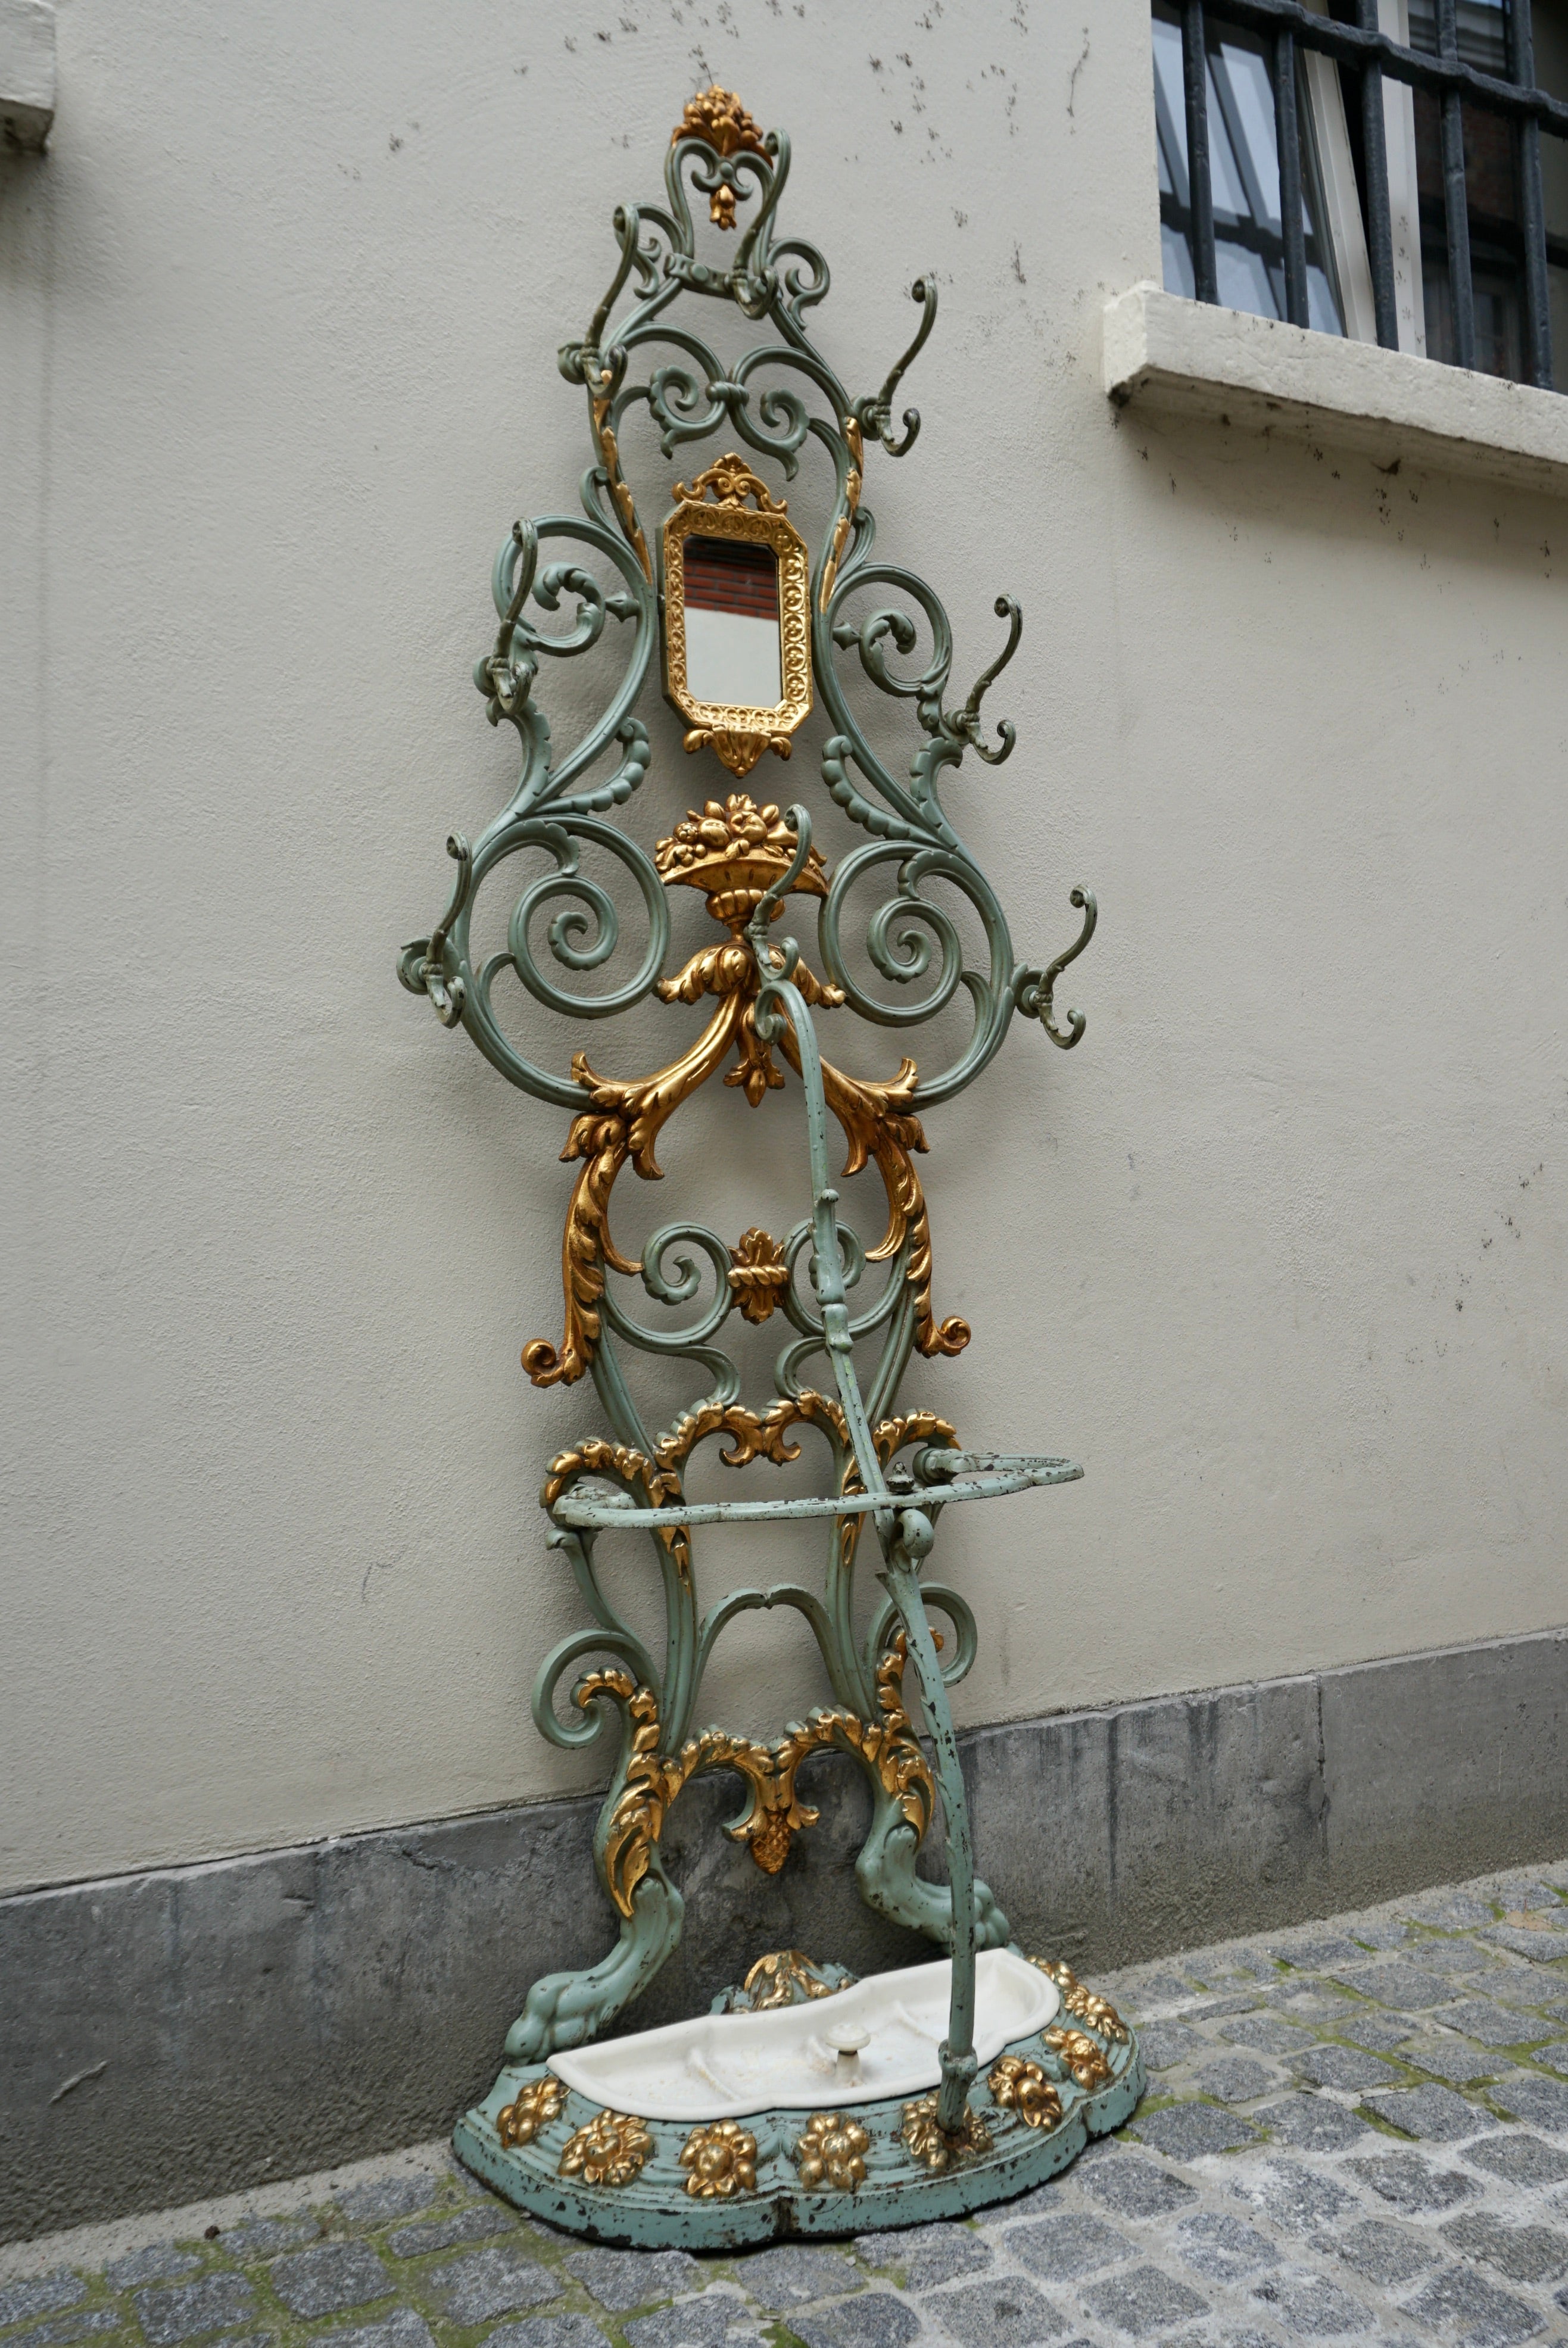 19th Century French Cast Iron Painted and Gilded Hall Stand

Very attractive 19th Century French cast iron painted and gilded hall stand with original small mirror. Sourced from France and in good original condition.Place this elegant antique hall